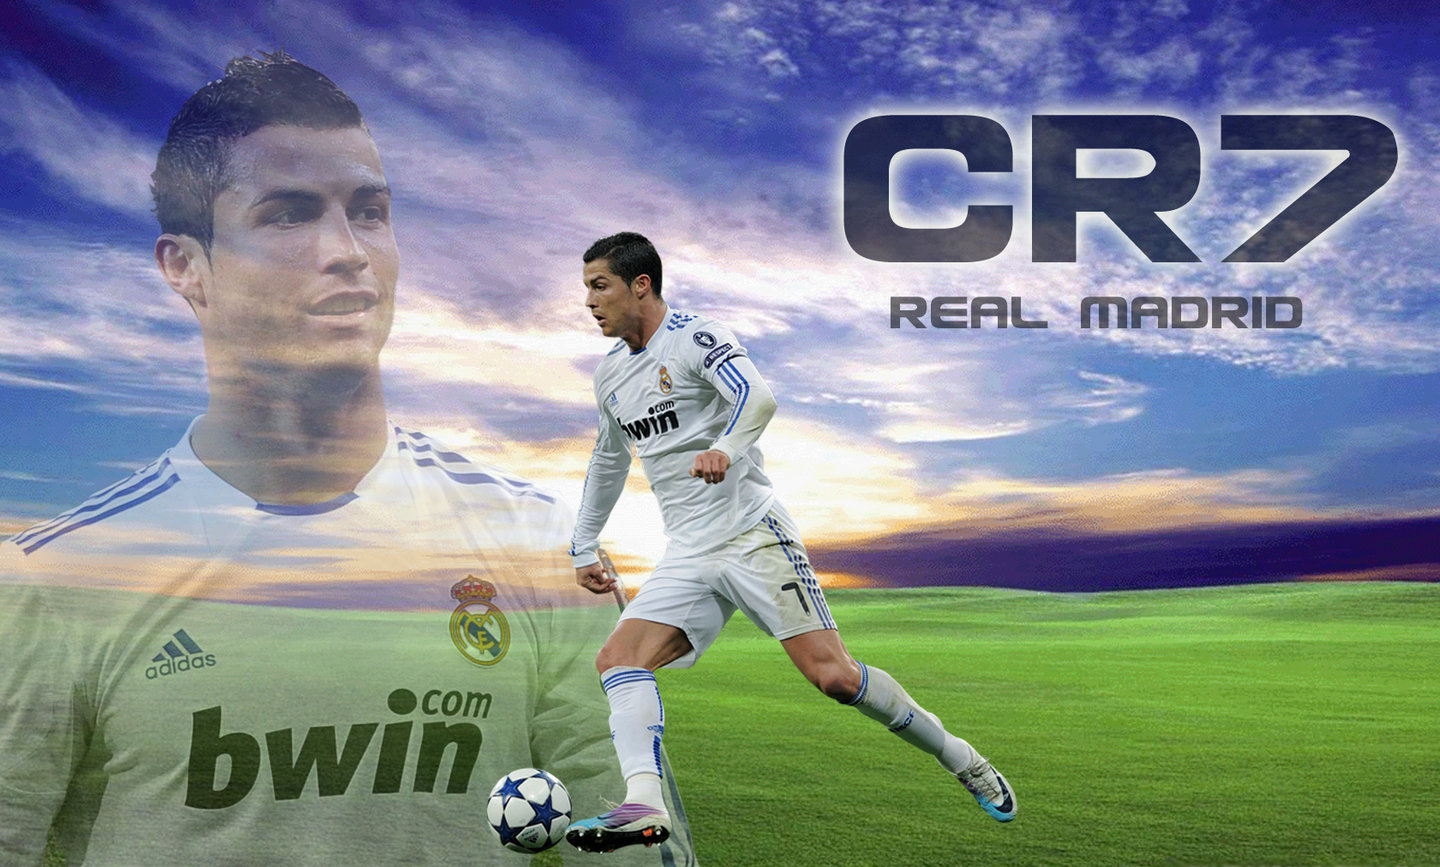 Player Stars Wallpapers Cristiano Ronaldo In Real Madrid Wallpapers